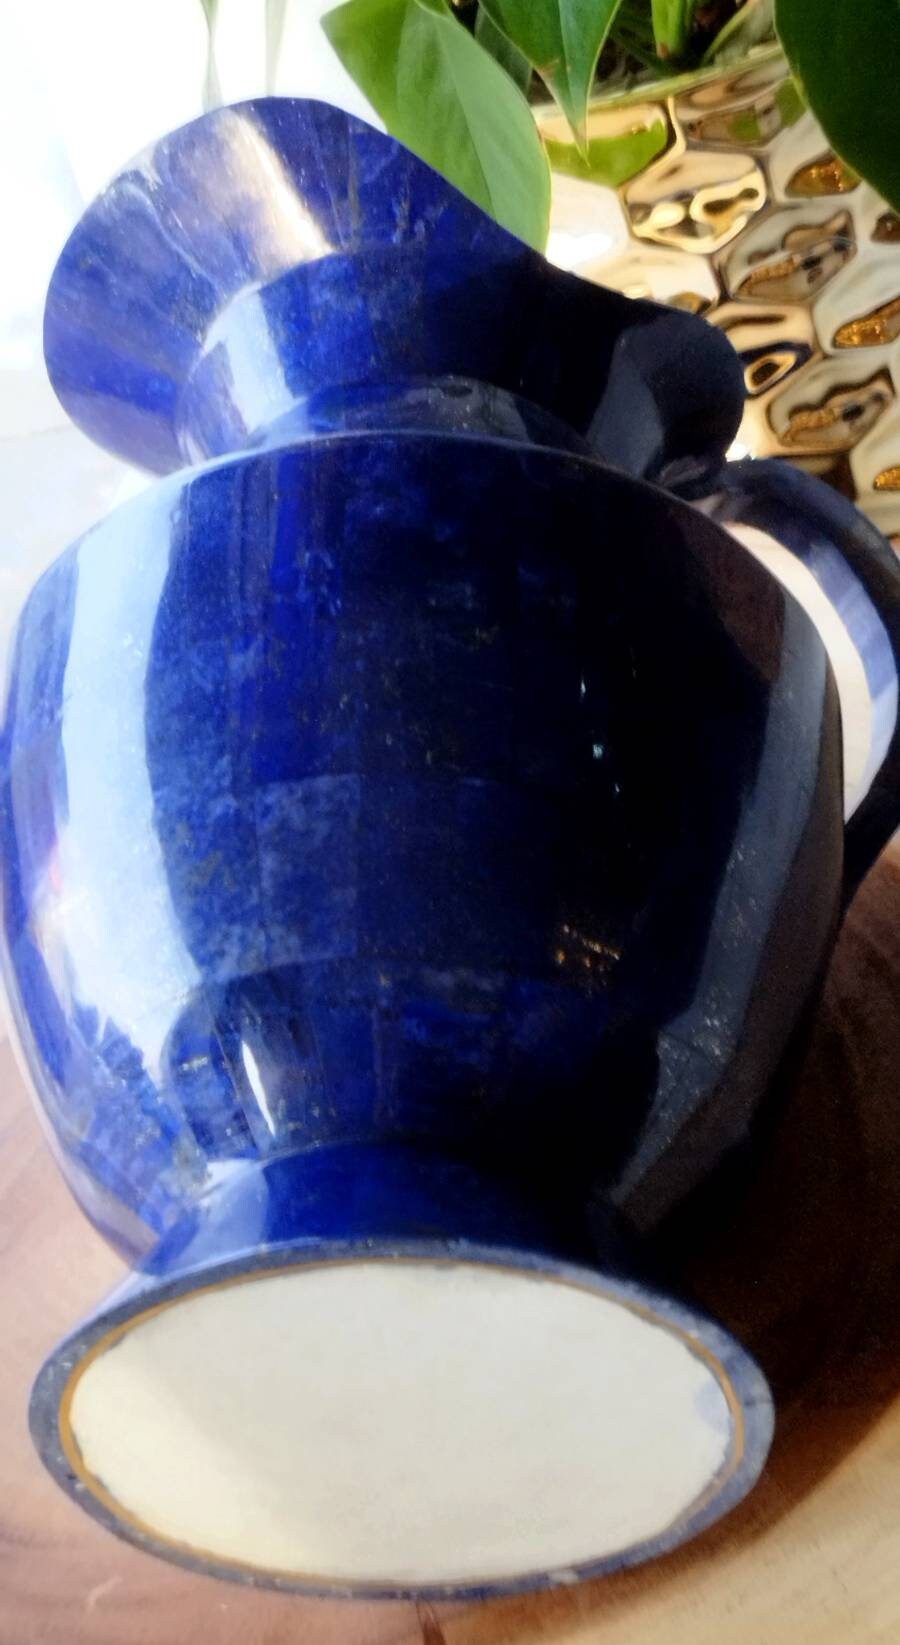 Stunning Lapis Lazuli, Tea pot, Water Pot made in Afghanistan, decor, home decor, gift for her, gift for Mom, gift for him